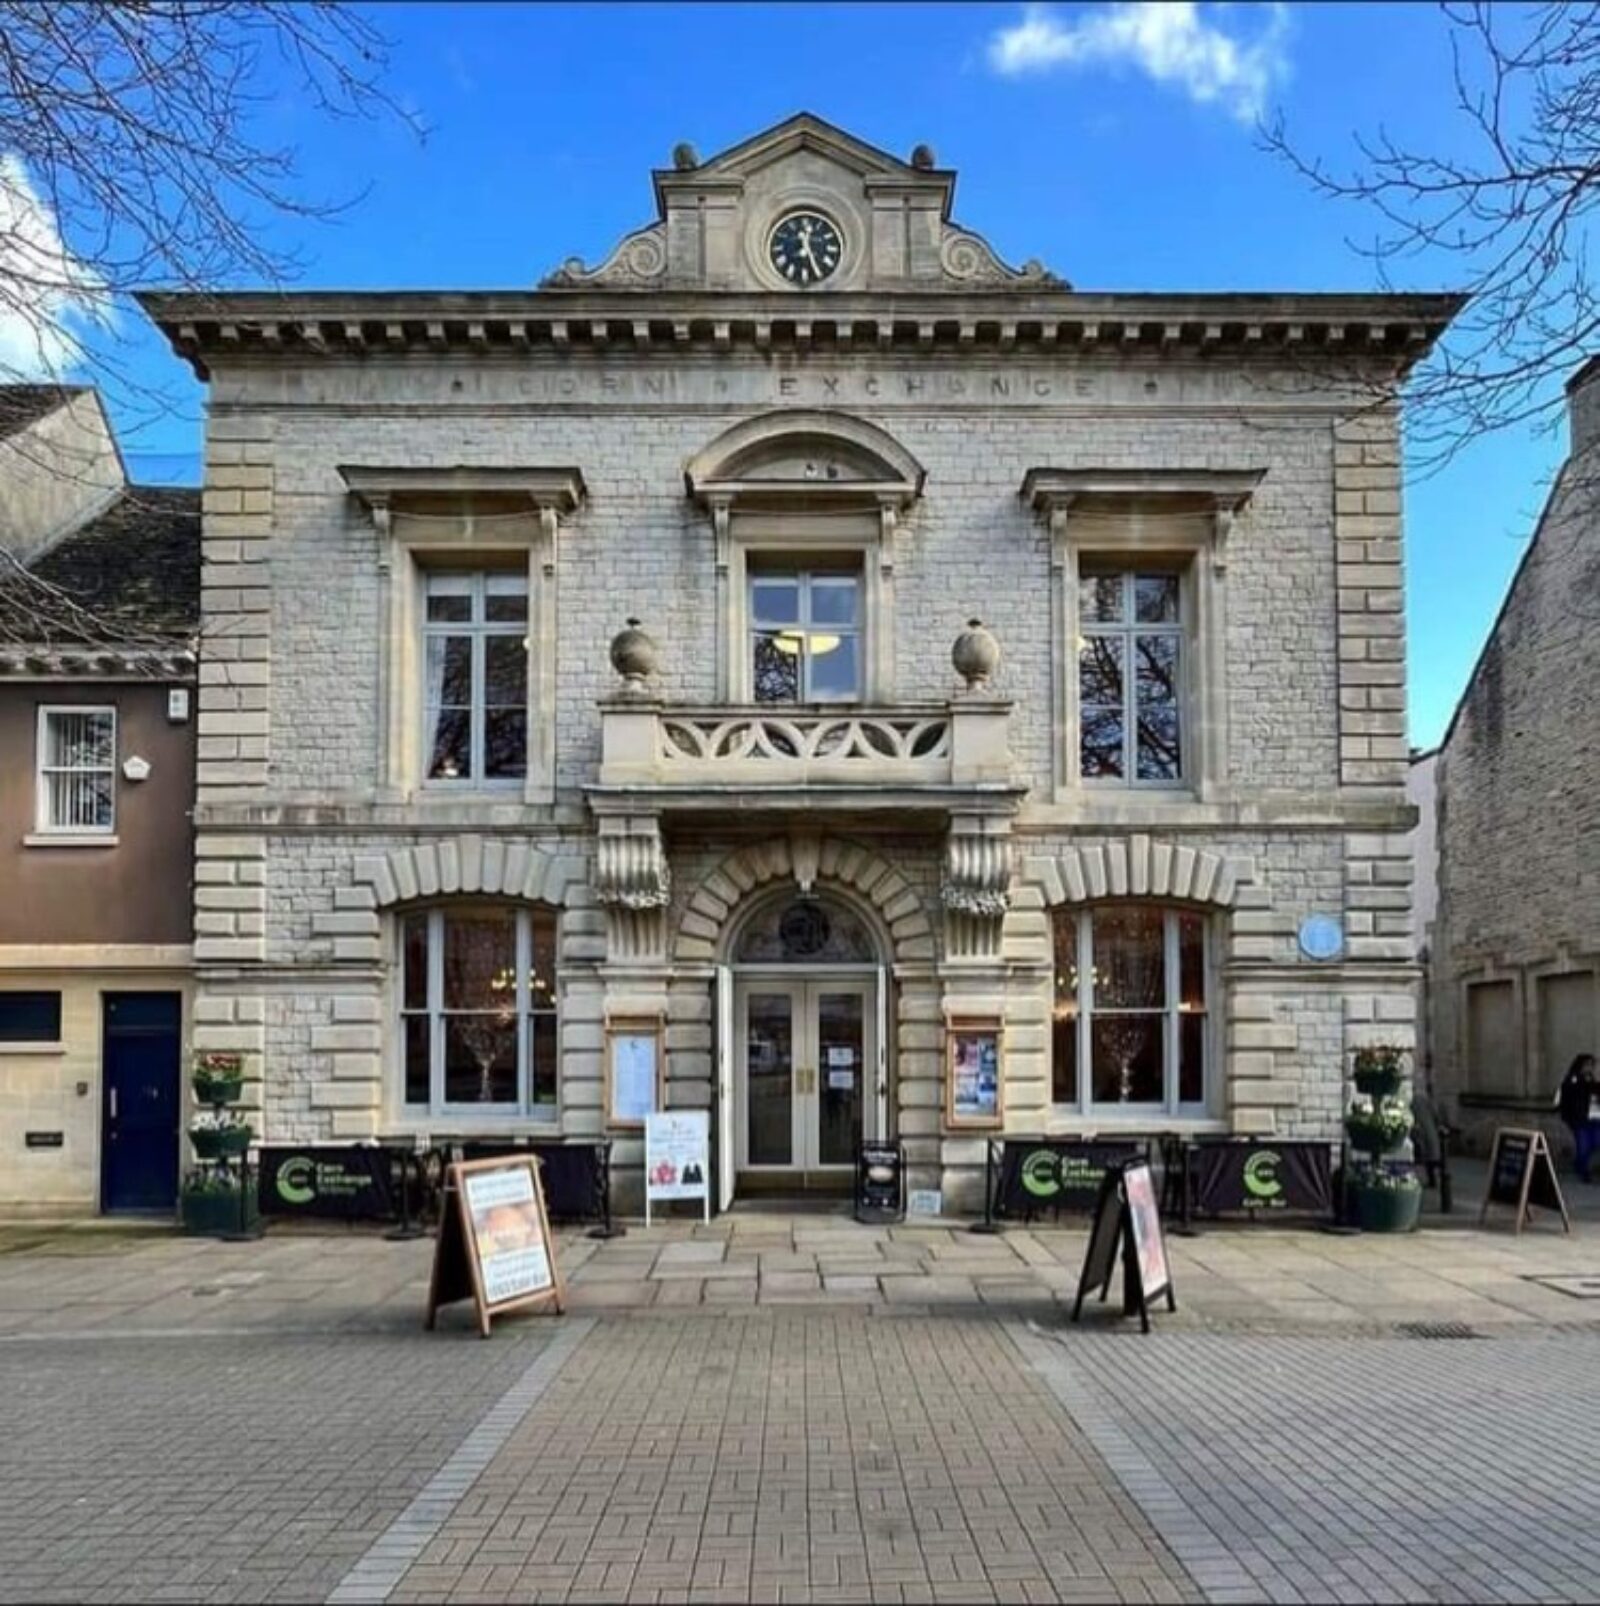 Proud of Witney - Our Corn Exchange